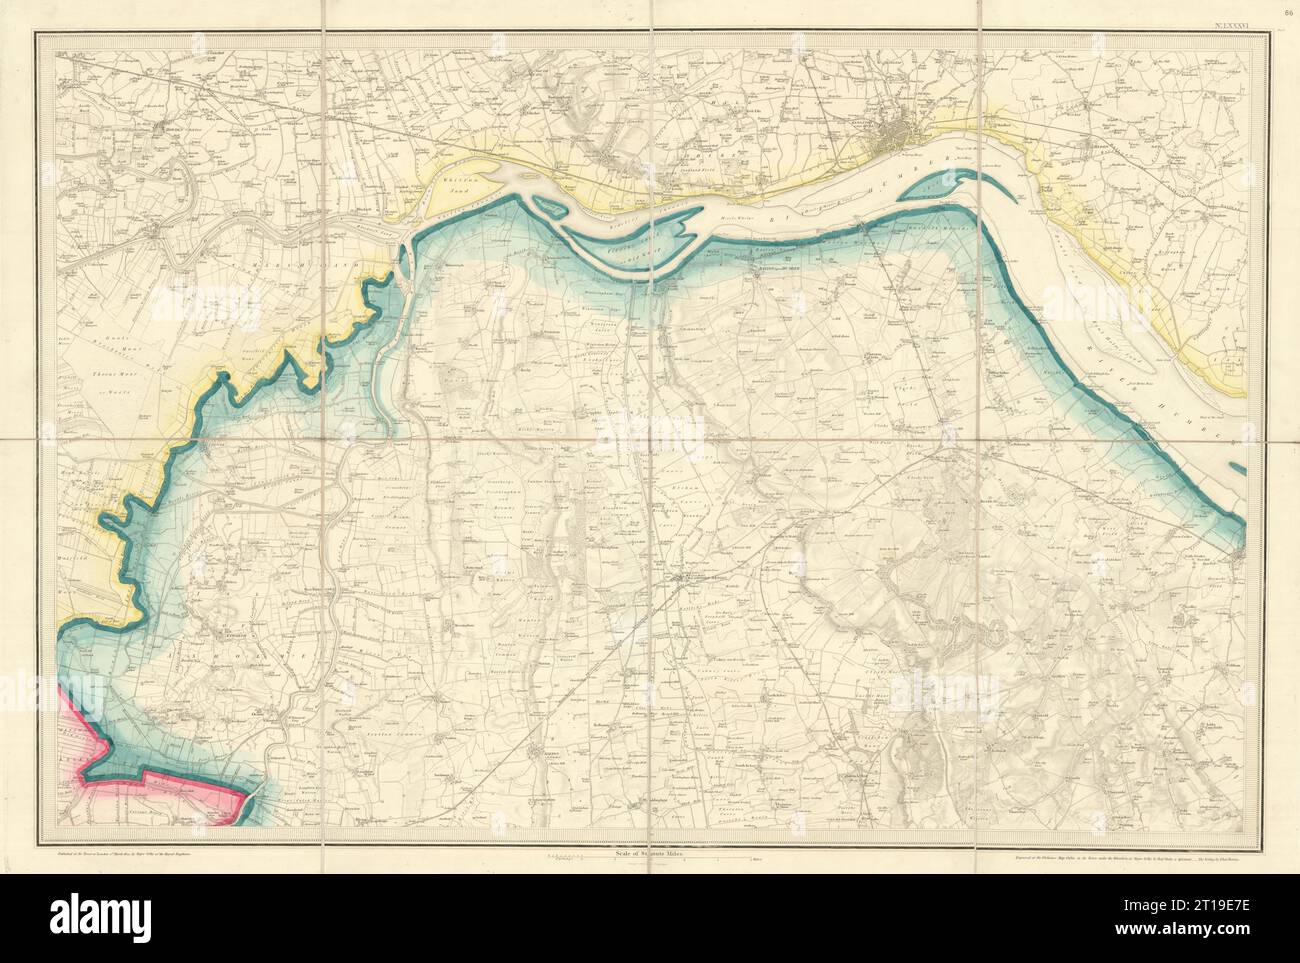 OS #86 Humber Estuary/Humberhead Levels, North Lincolnshire Wolds. Hull 1824 map Stock Photo